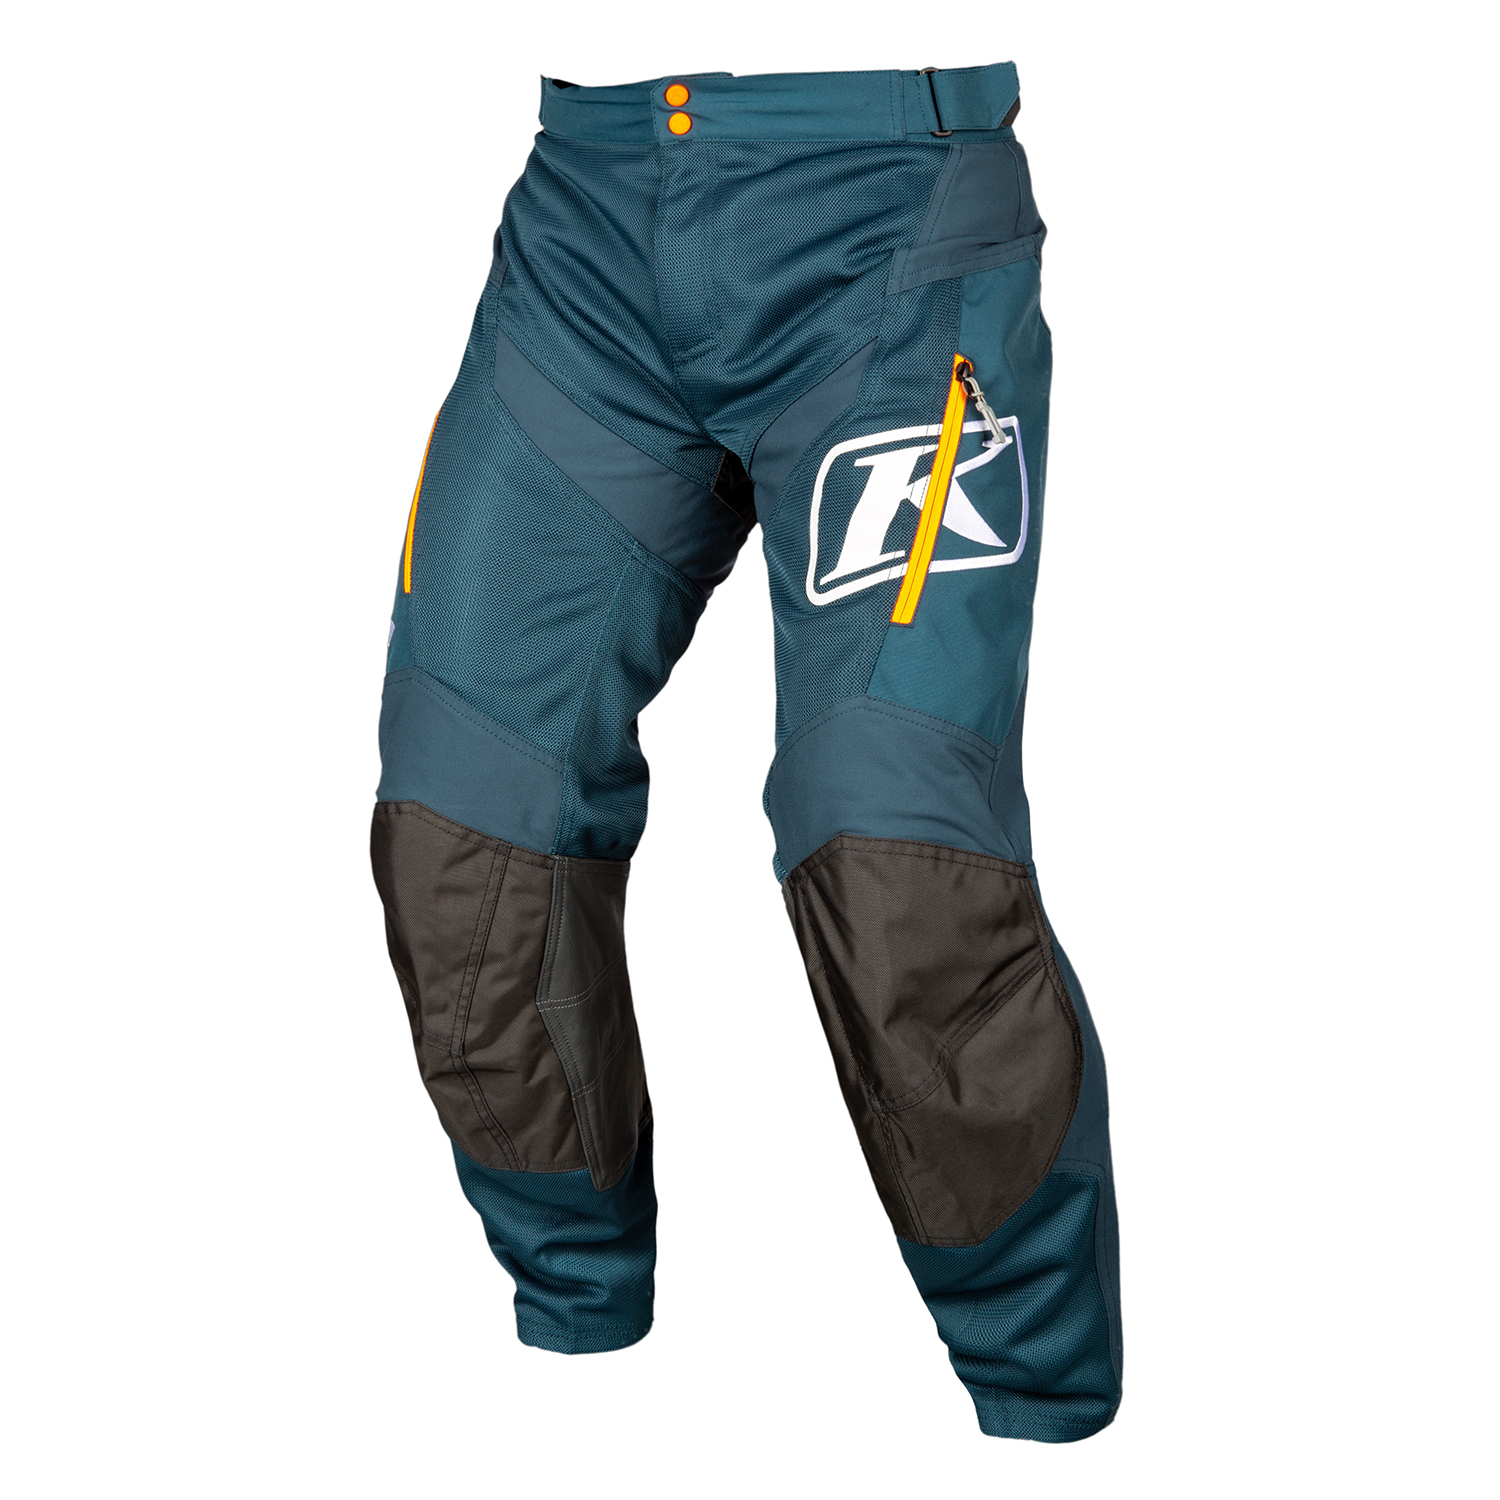 Welcome KLIM Motorcycle and Off-Road Gear